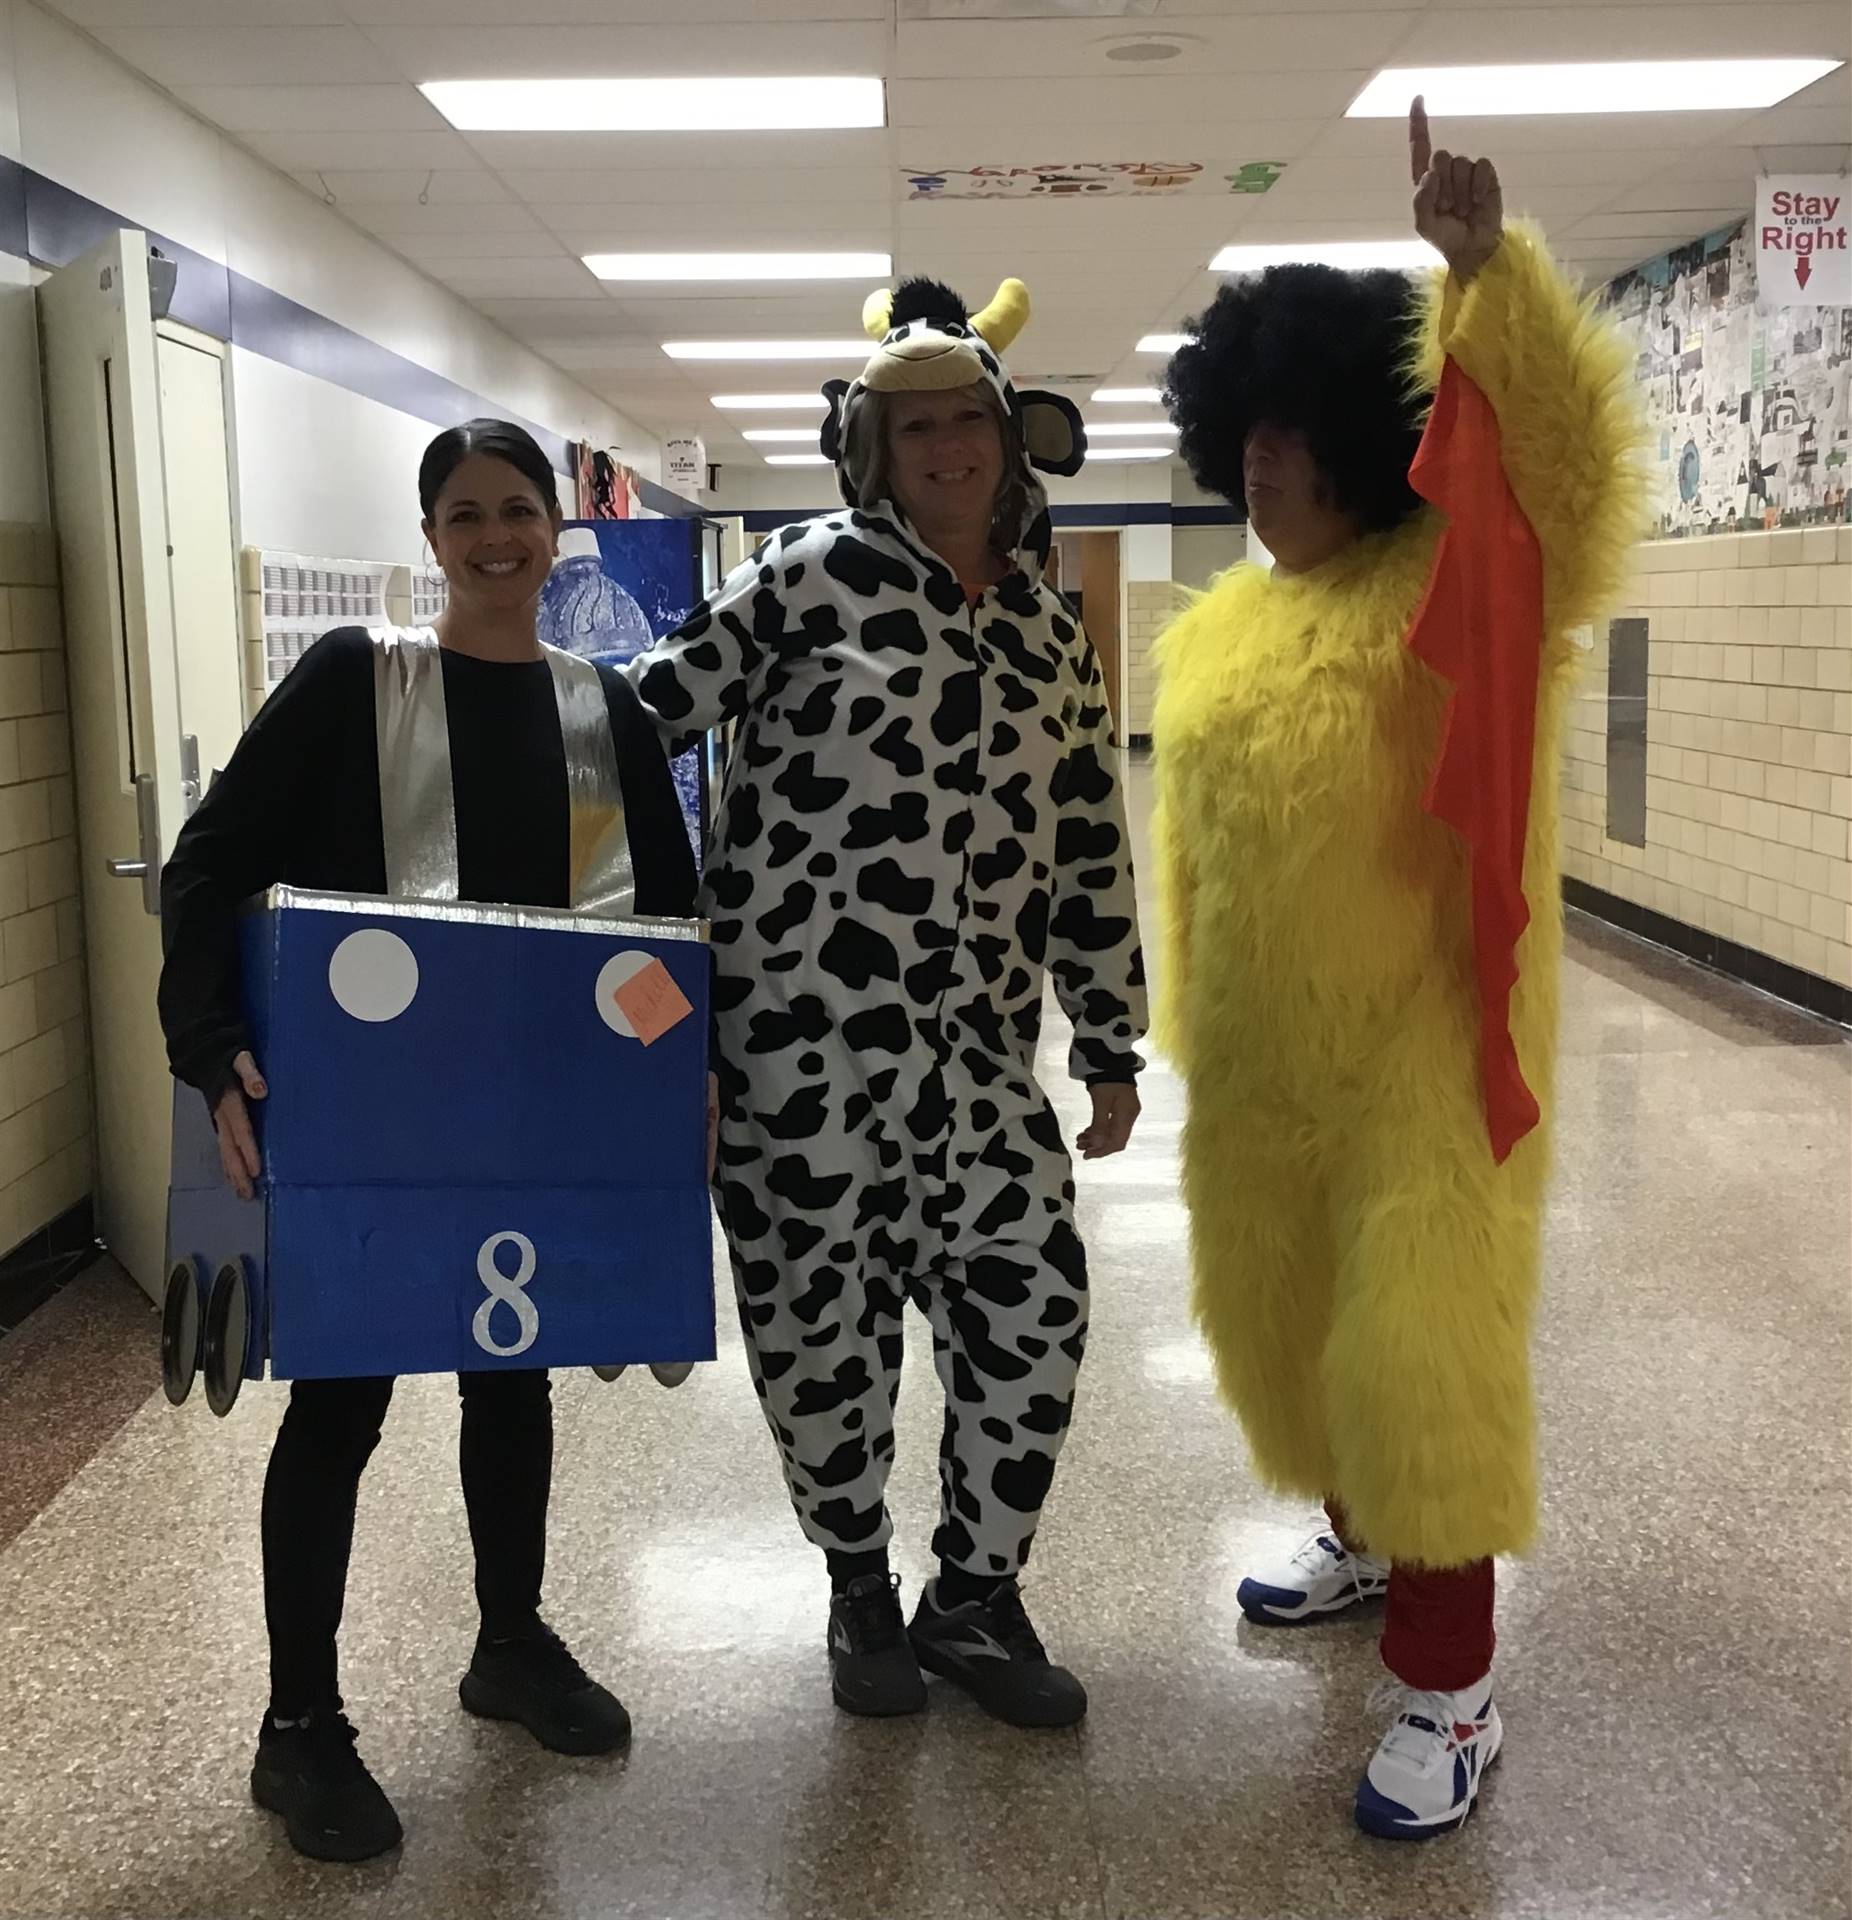 3 SAES staff members in costumes 